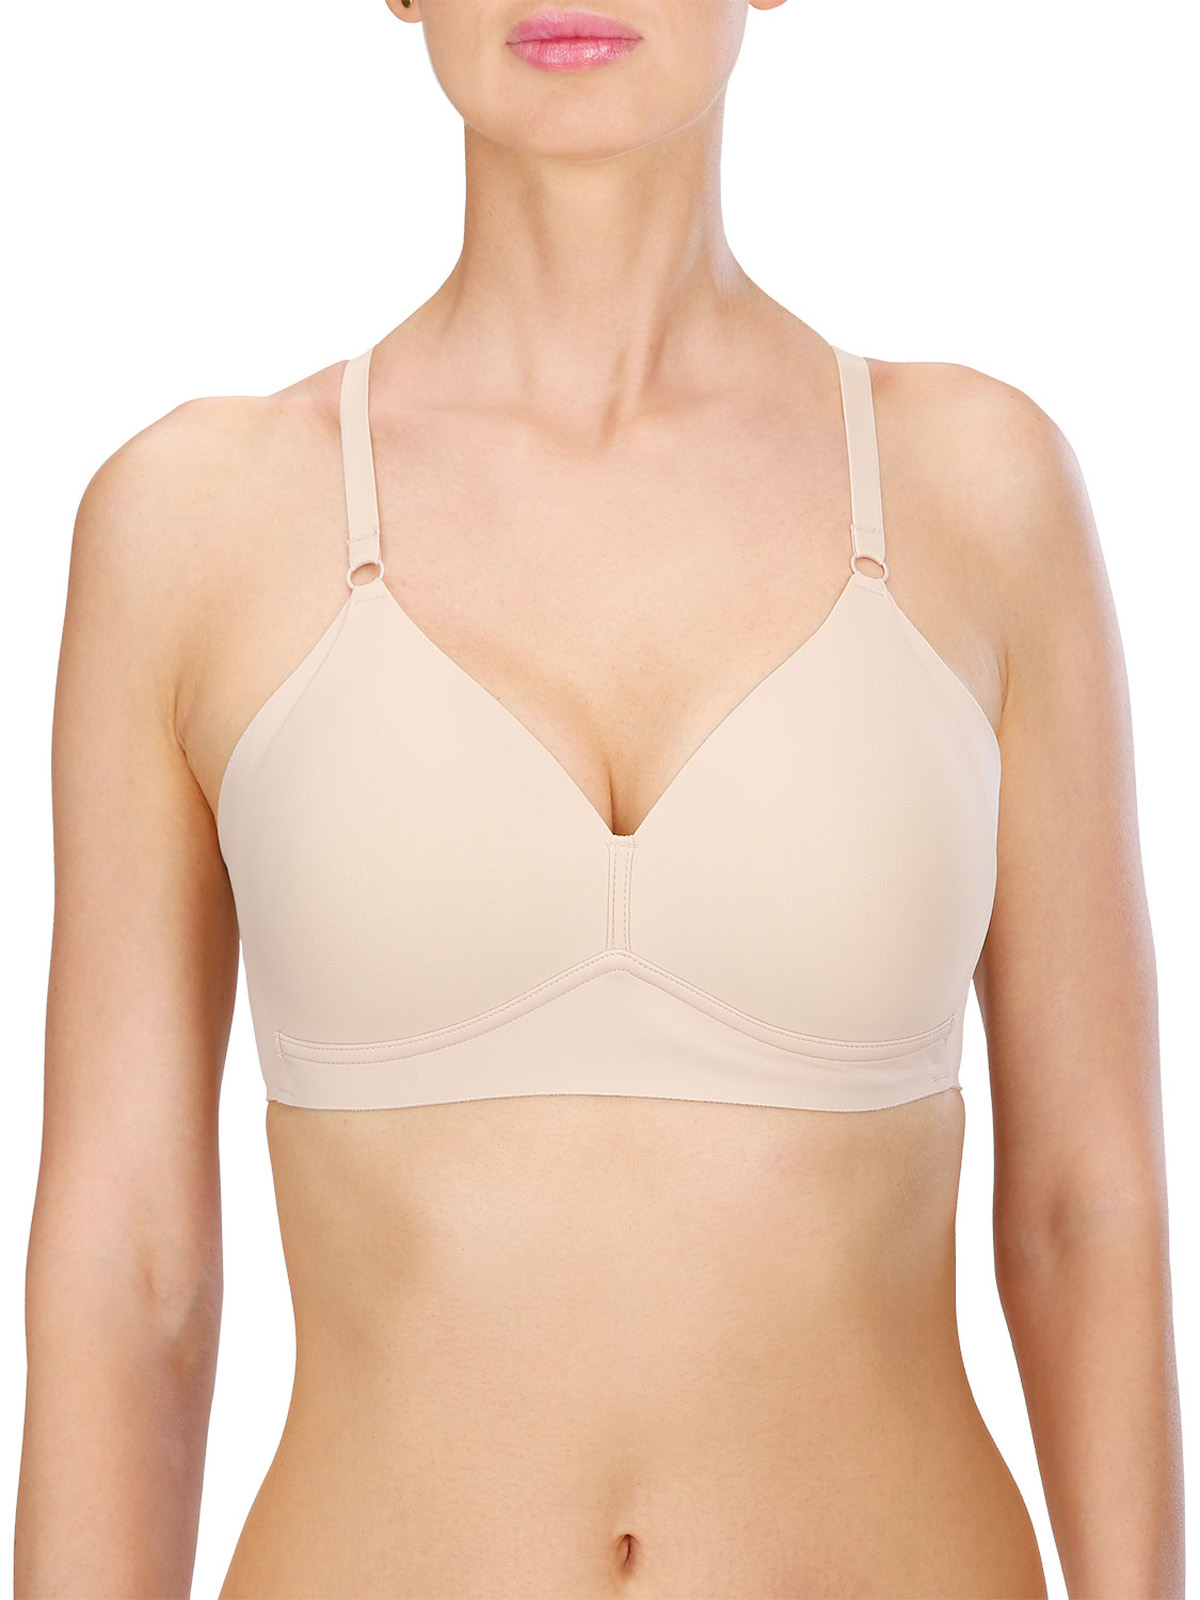 Ladies Moulded Soft Cup Crossover Bras by Naturana 5254 - Lord